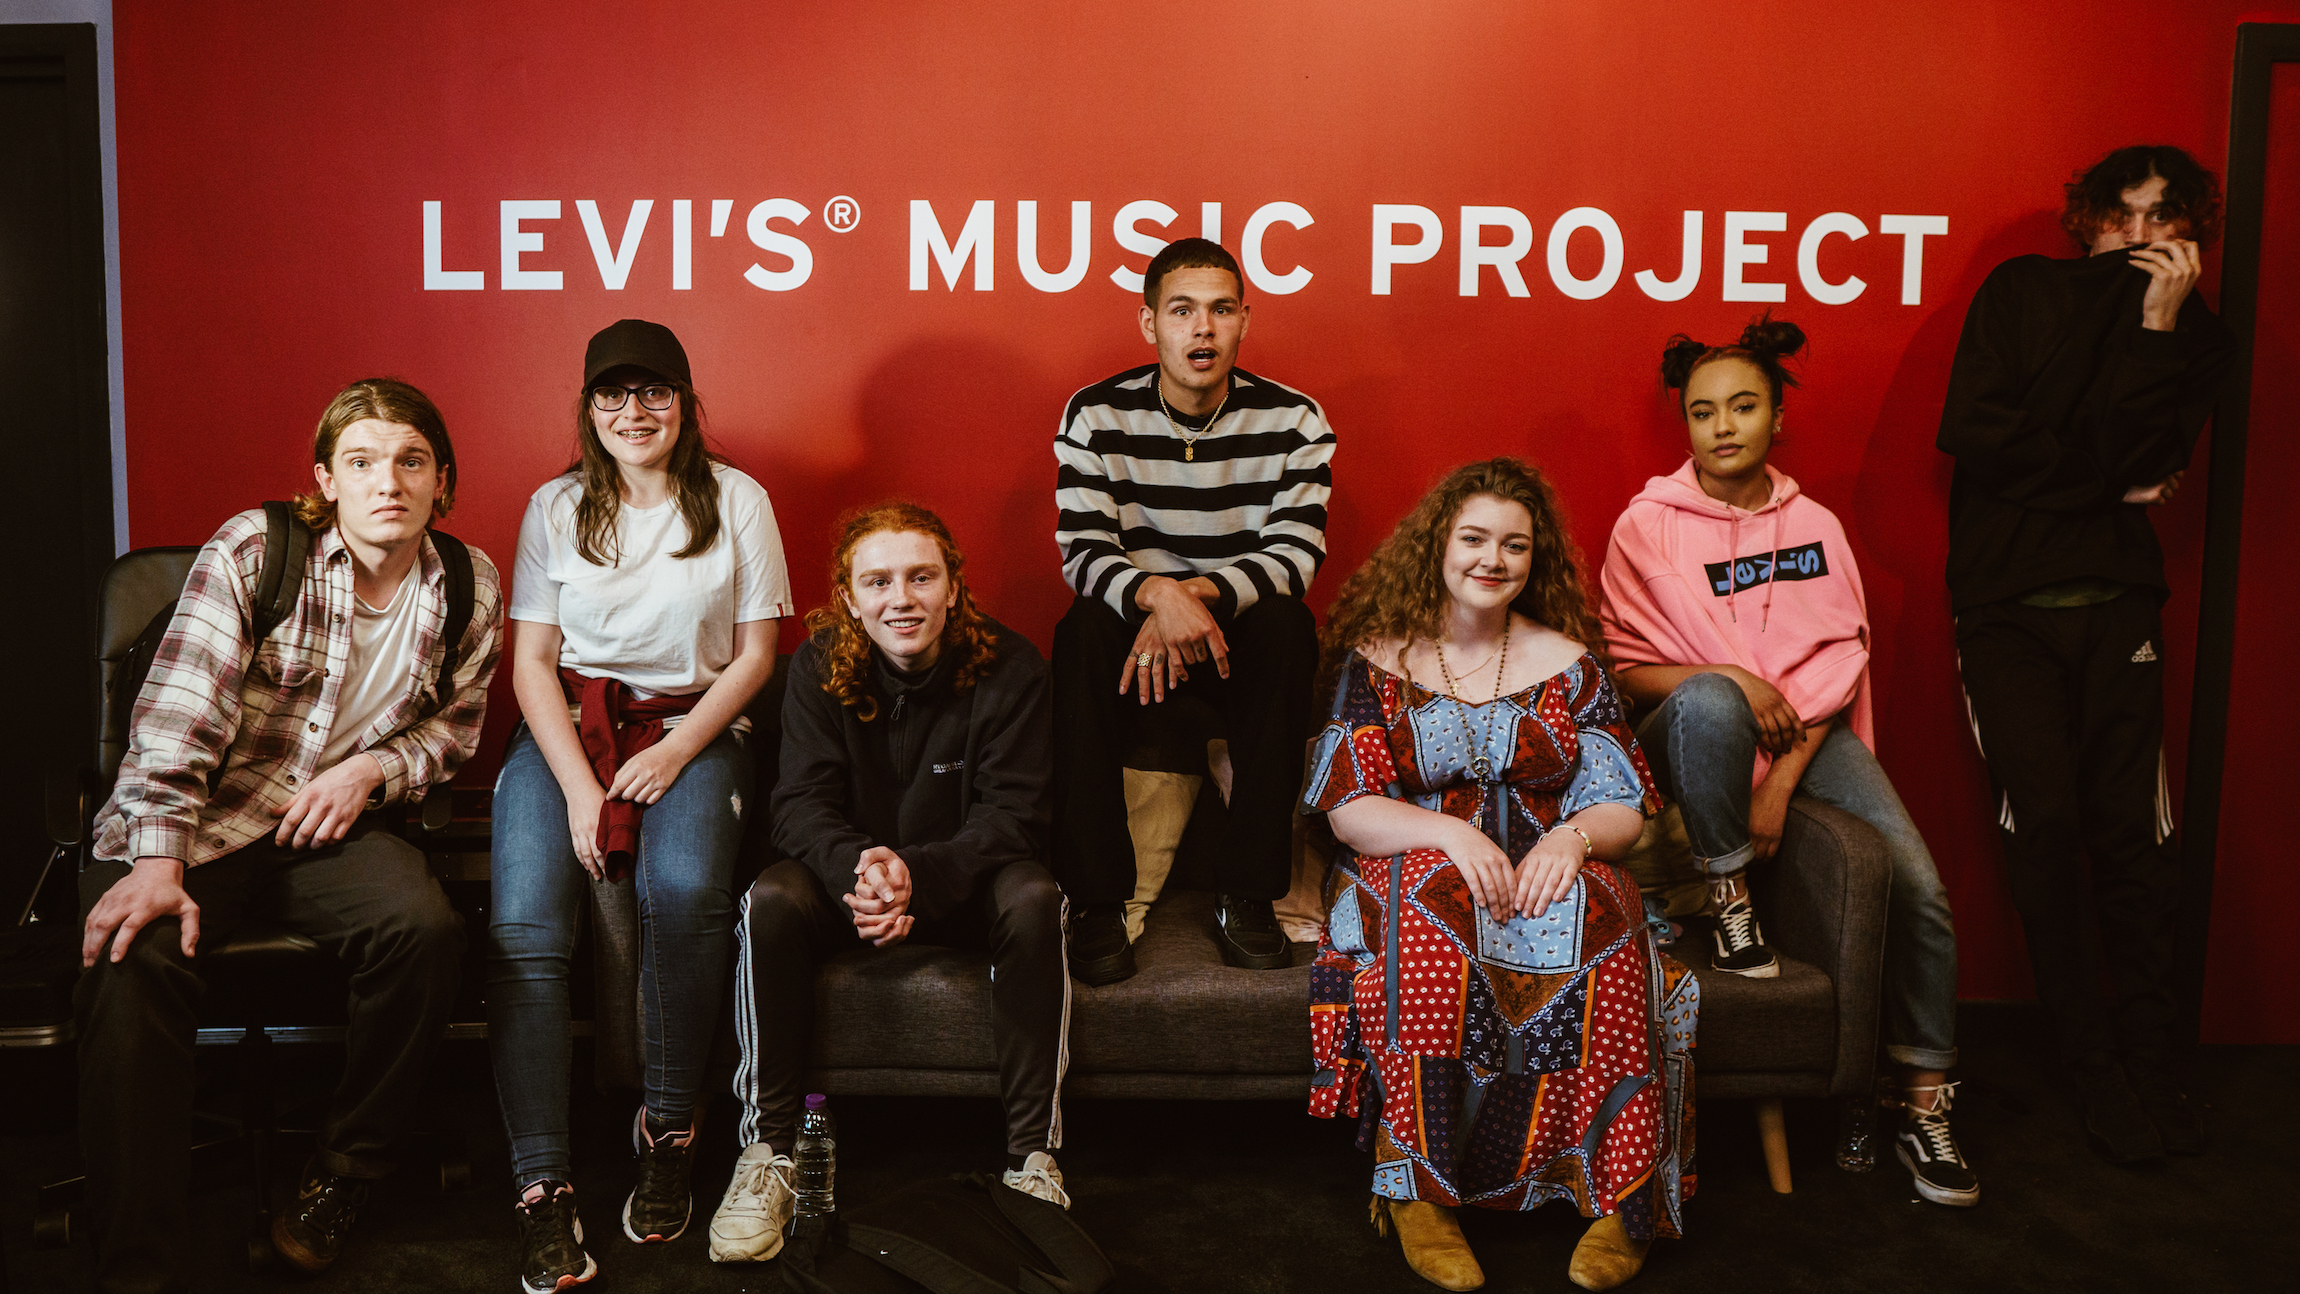 Slowthai and Levi's Are Helping Young Musicians and Producers in Liverpool